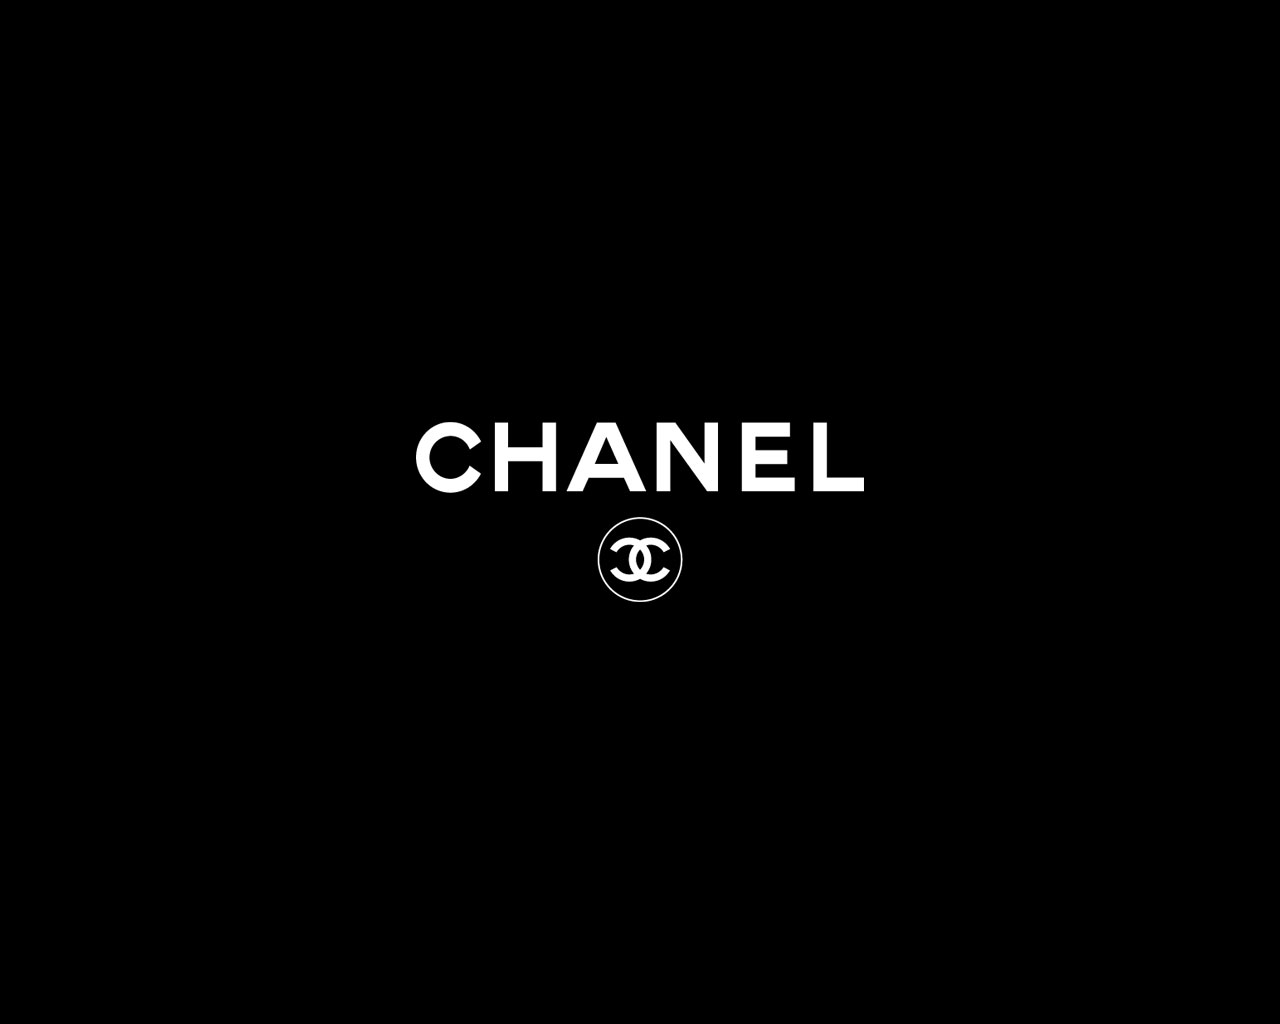 Background Chanel Image Gallery